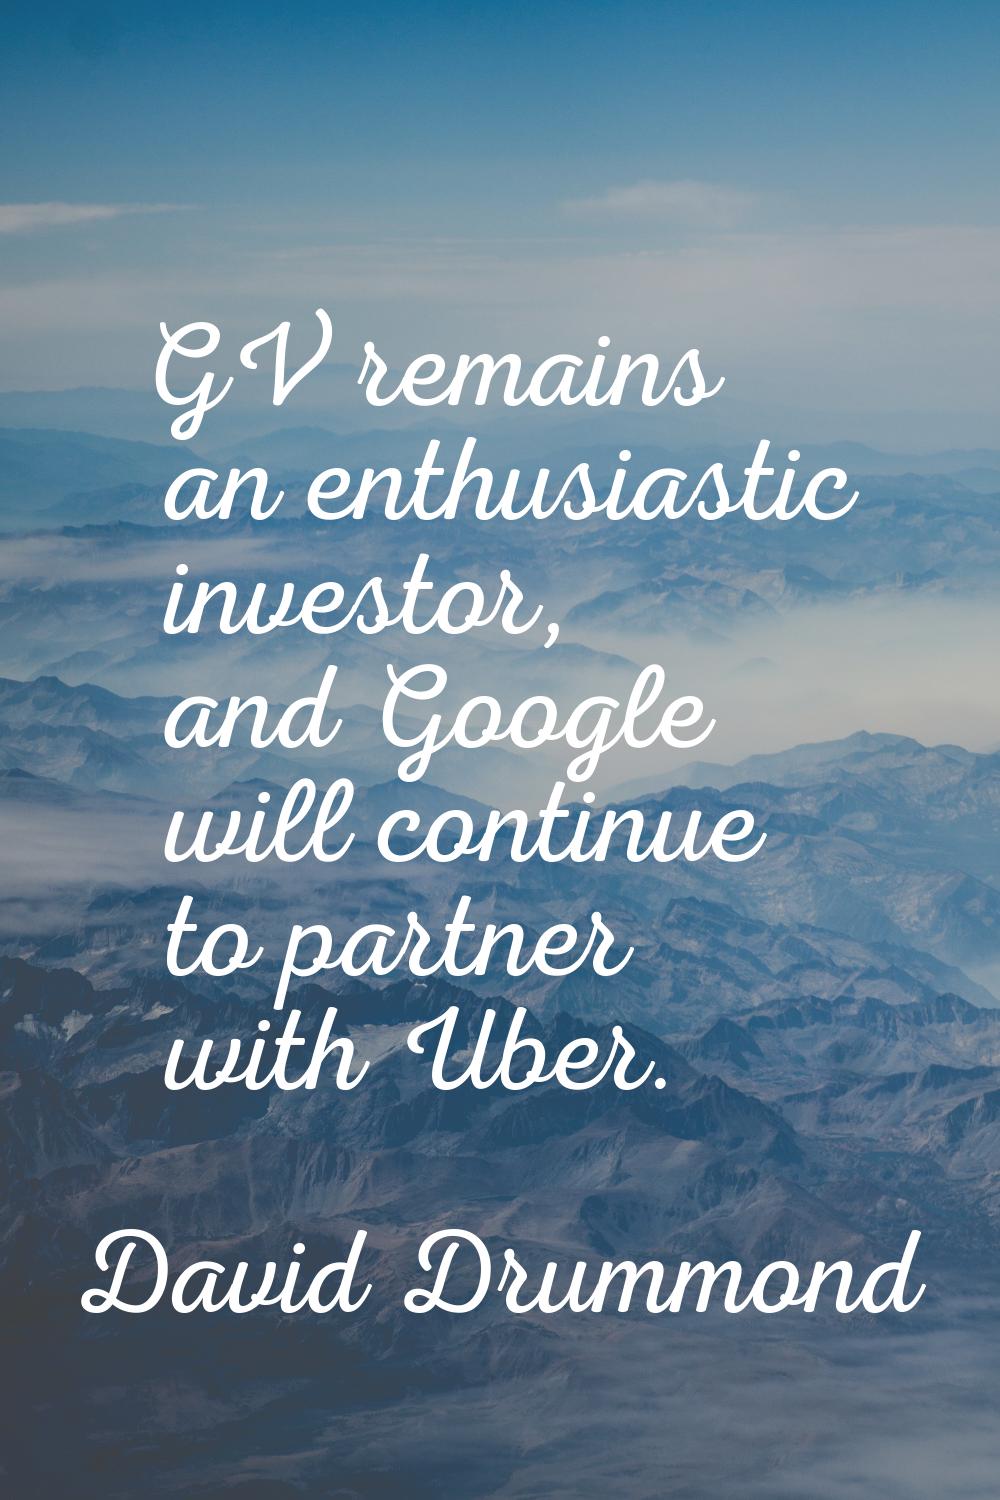 GV remains an enthusiastic investor, and Google will continue to partner with Uber.